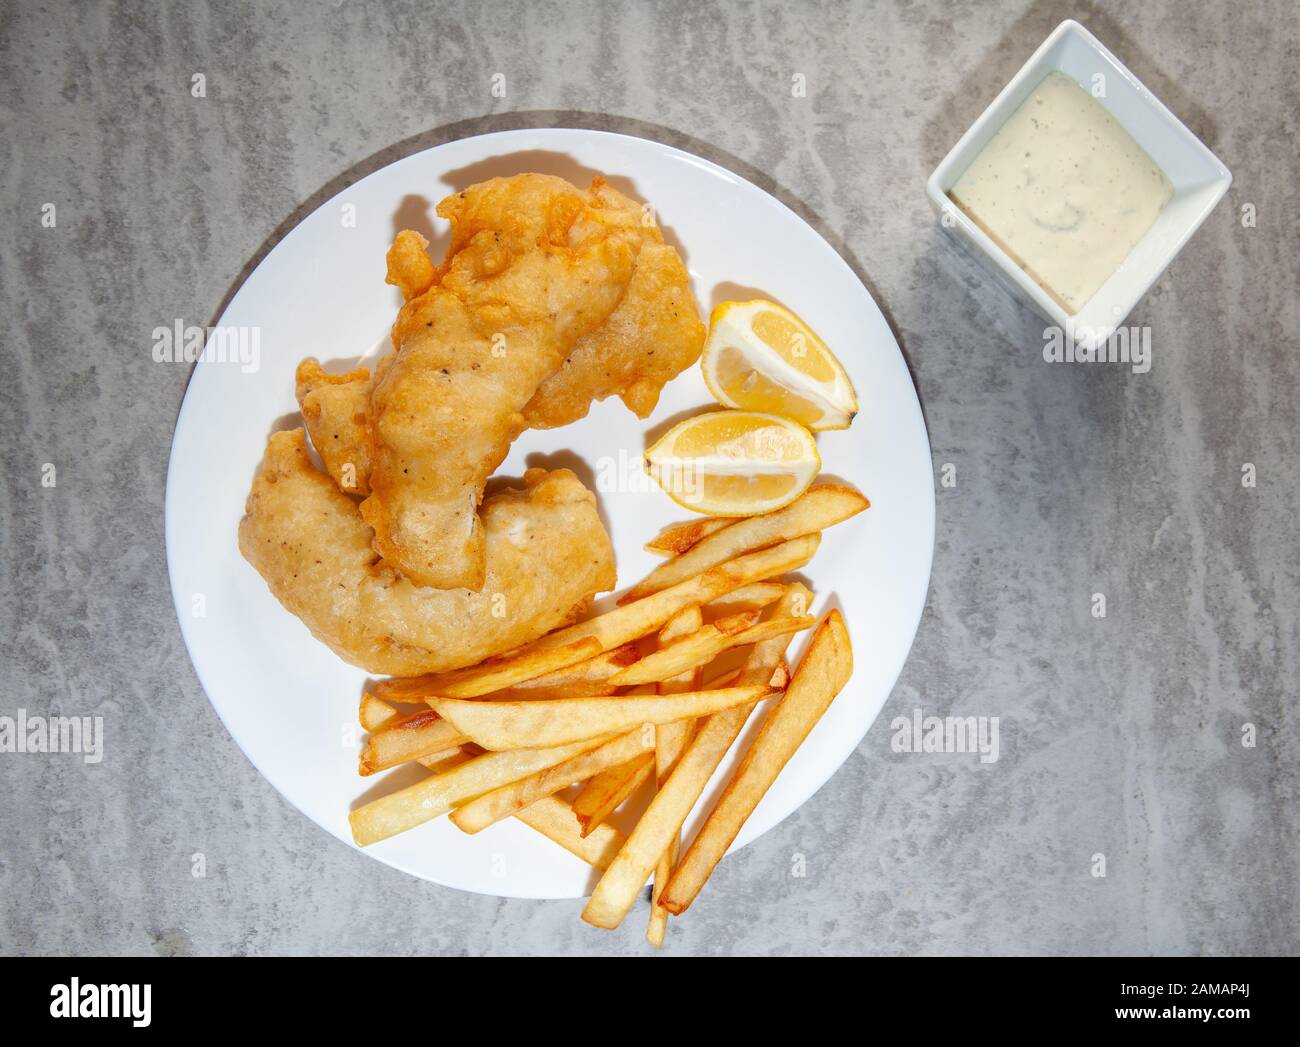 Homemade Fish and Chips Stock Photo